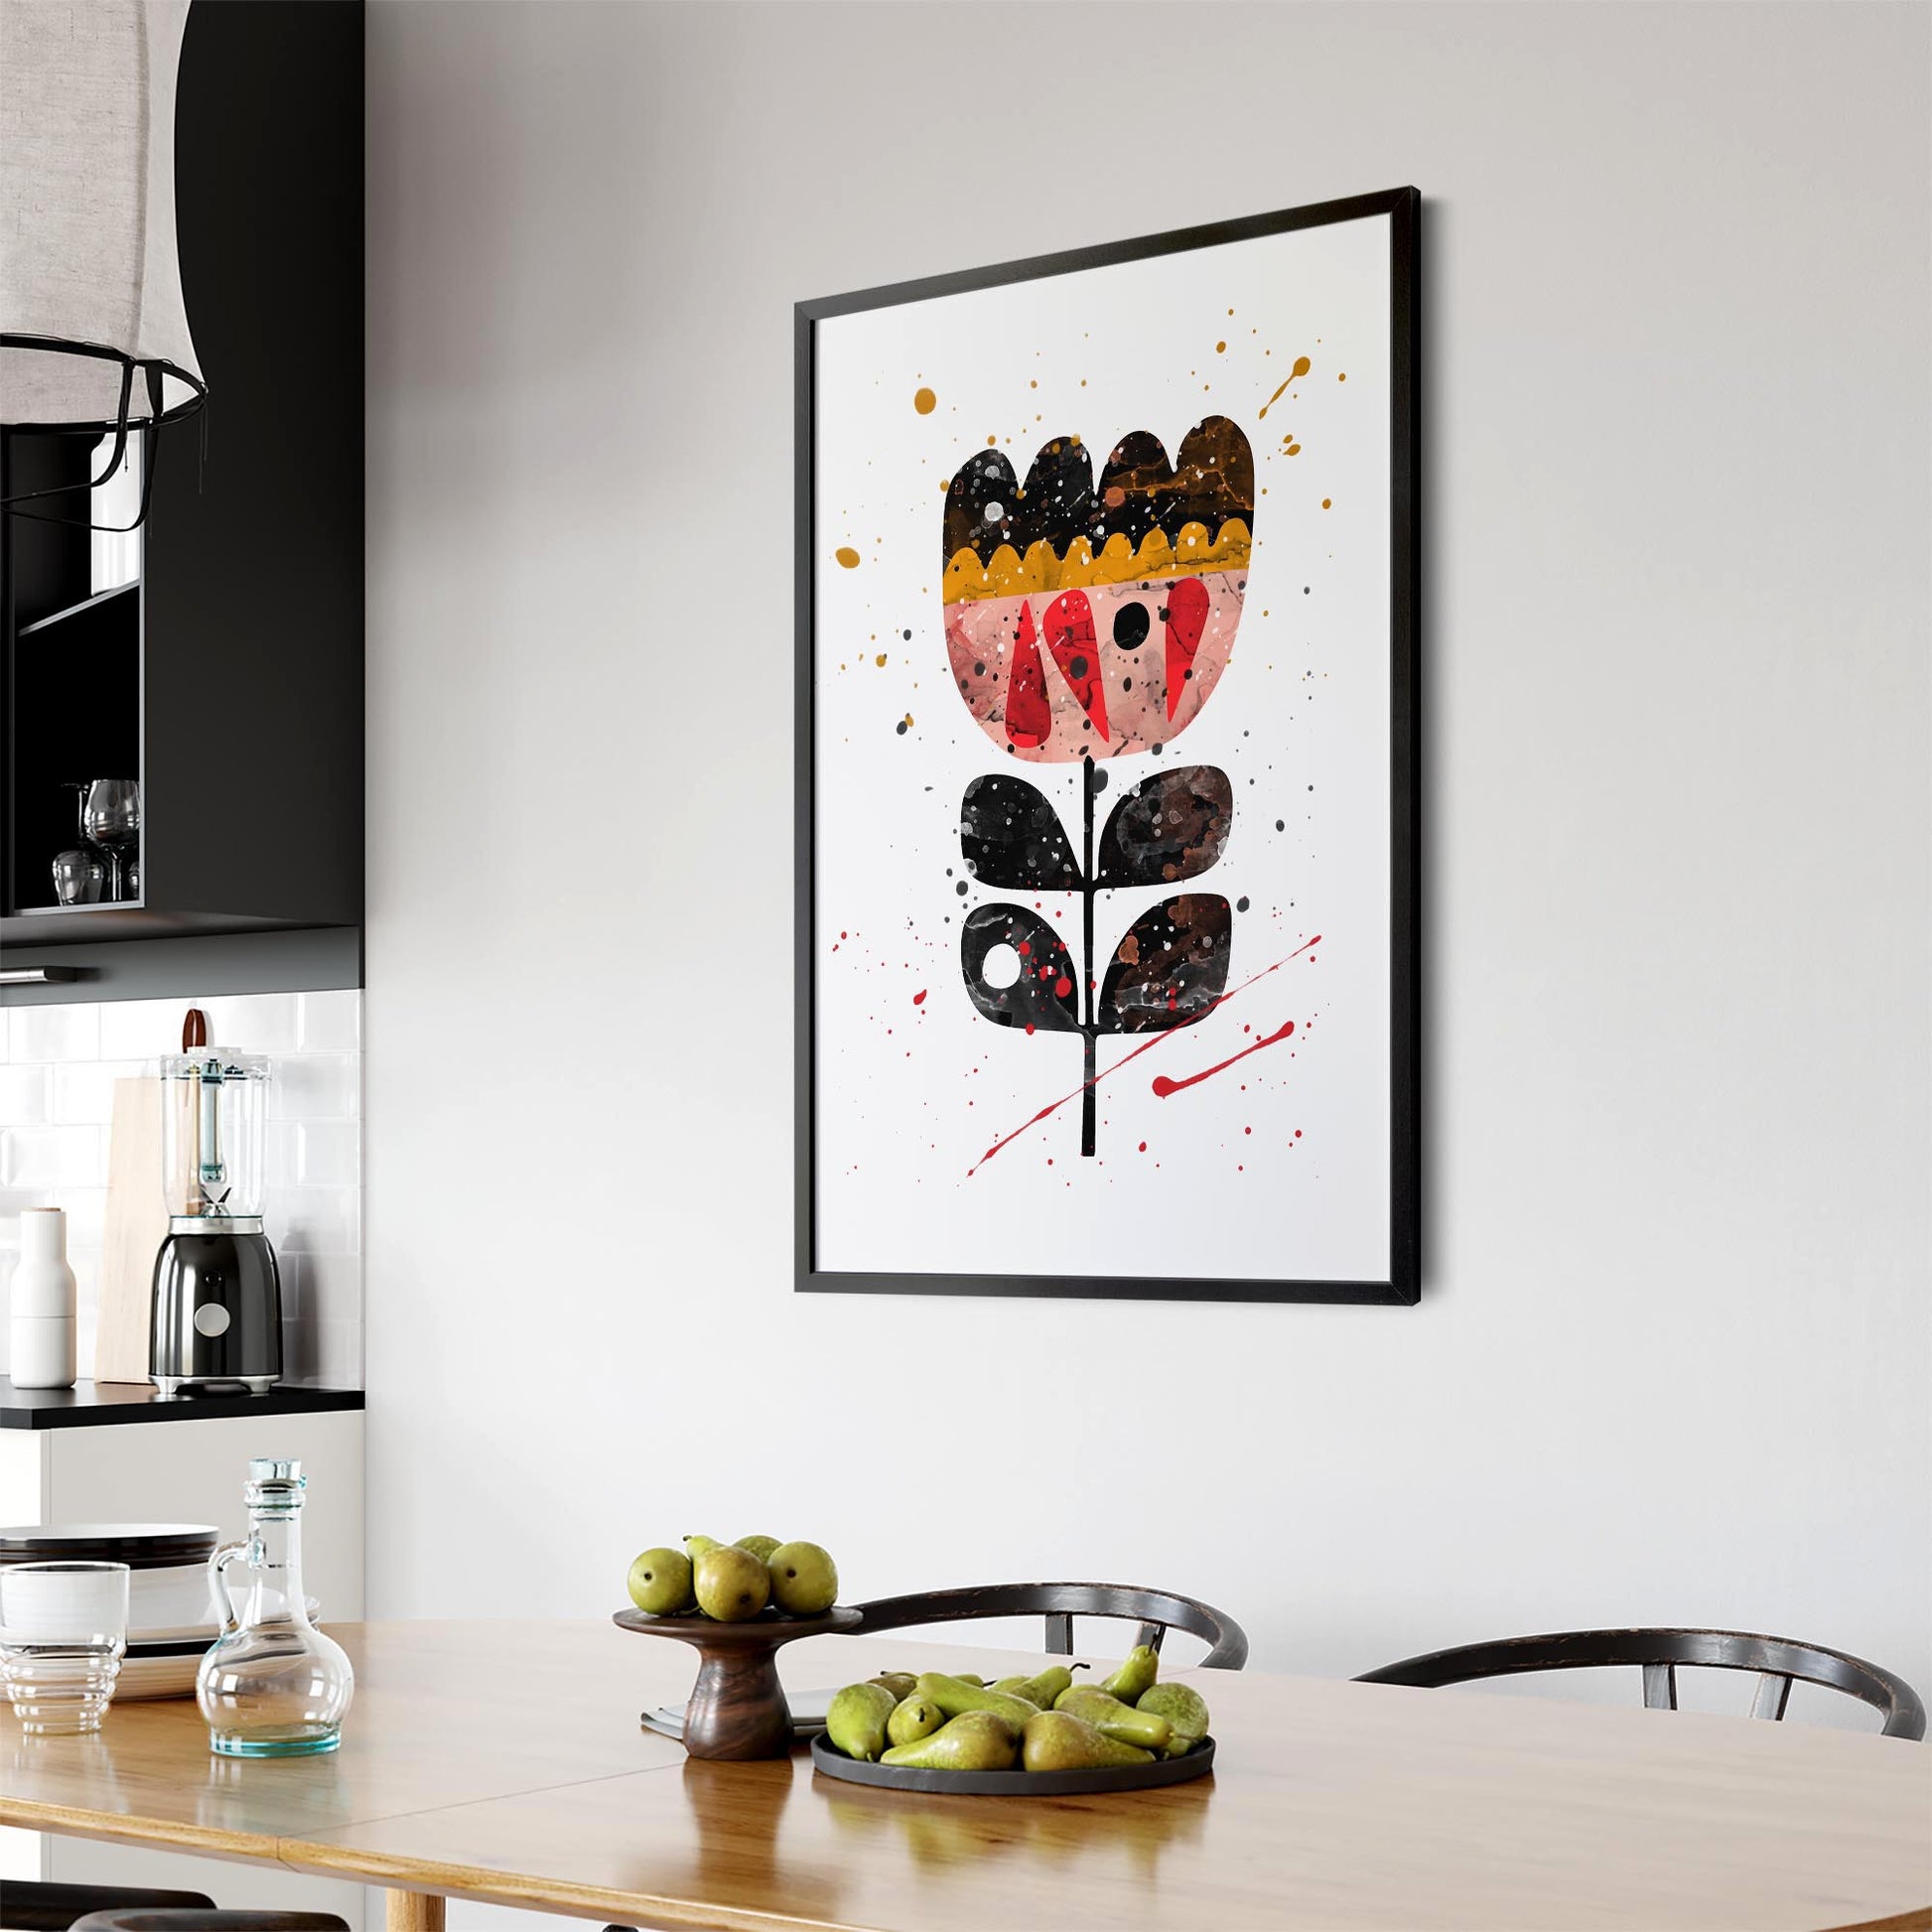 Scandi Flower Colourful Kitchen Cafe Wall Art #2 - The Affordable Art Company